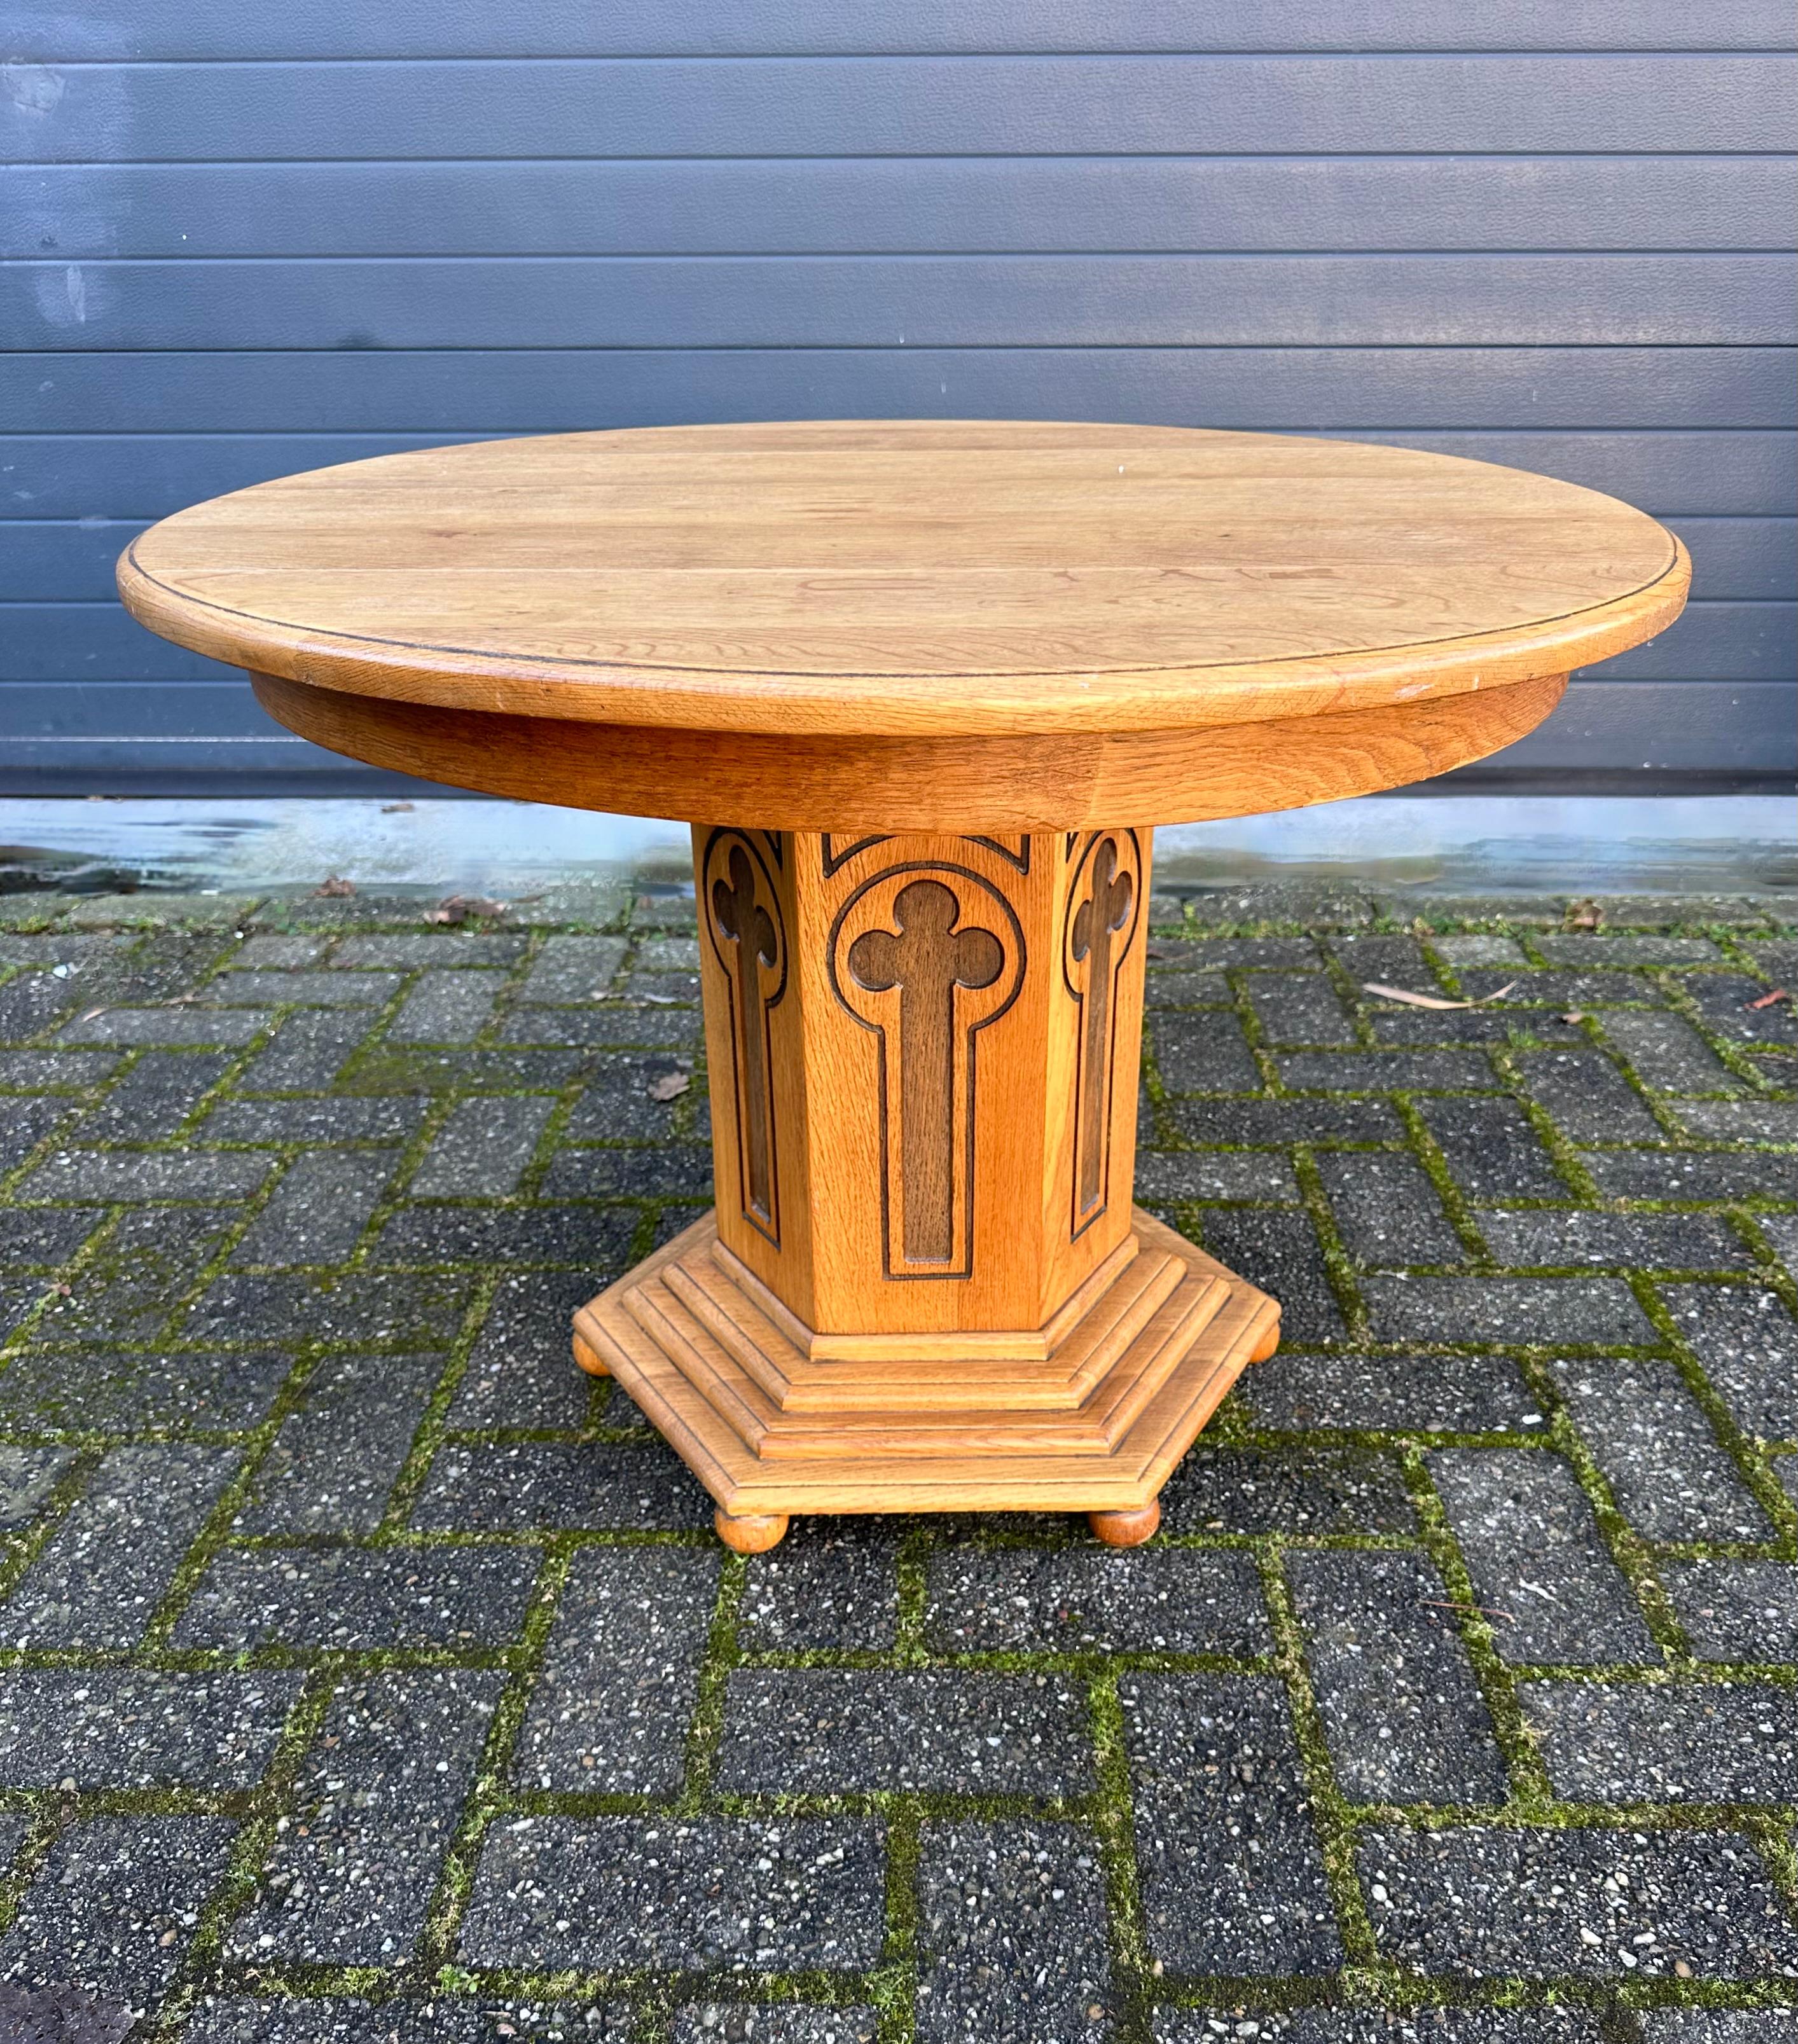 Early 1900 Solid Oak Wood Gothic Revival End Table or Coffee Table w. Round Top In Excellent Condition For Sale In Lisse, NL